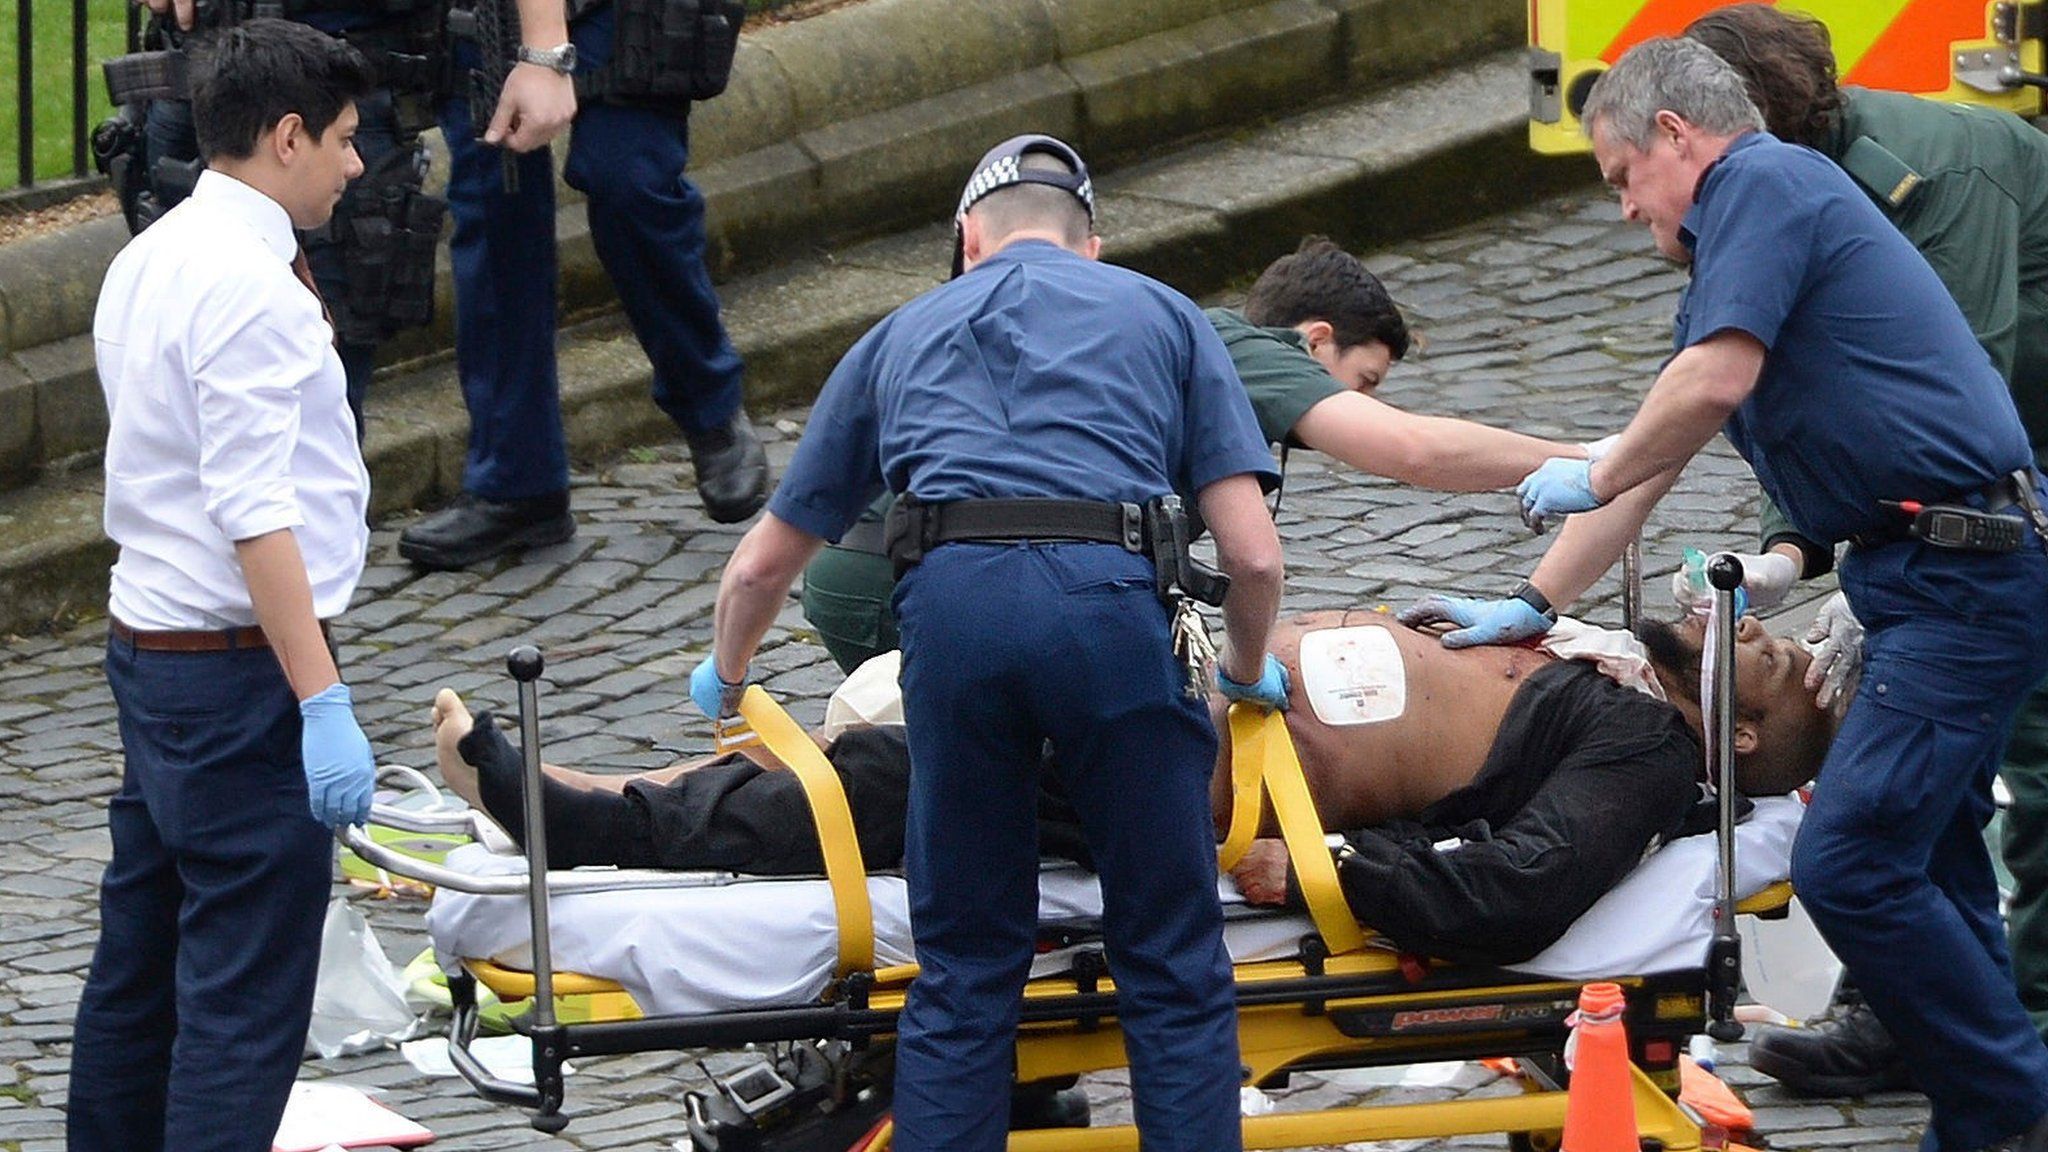 Khalid Massood being treated at the scene of the Westminster attack